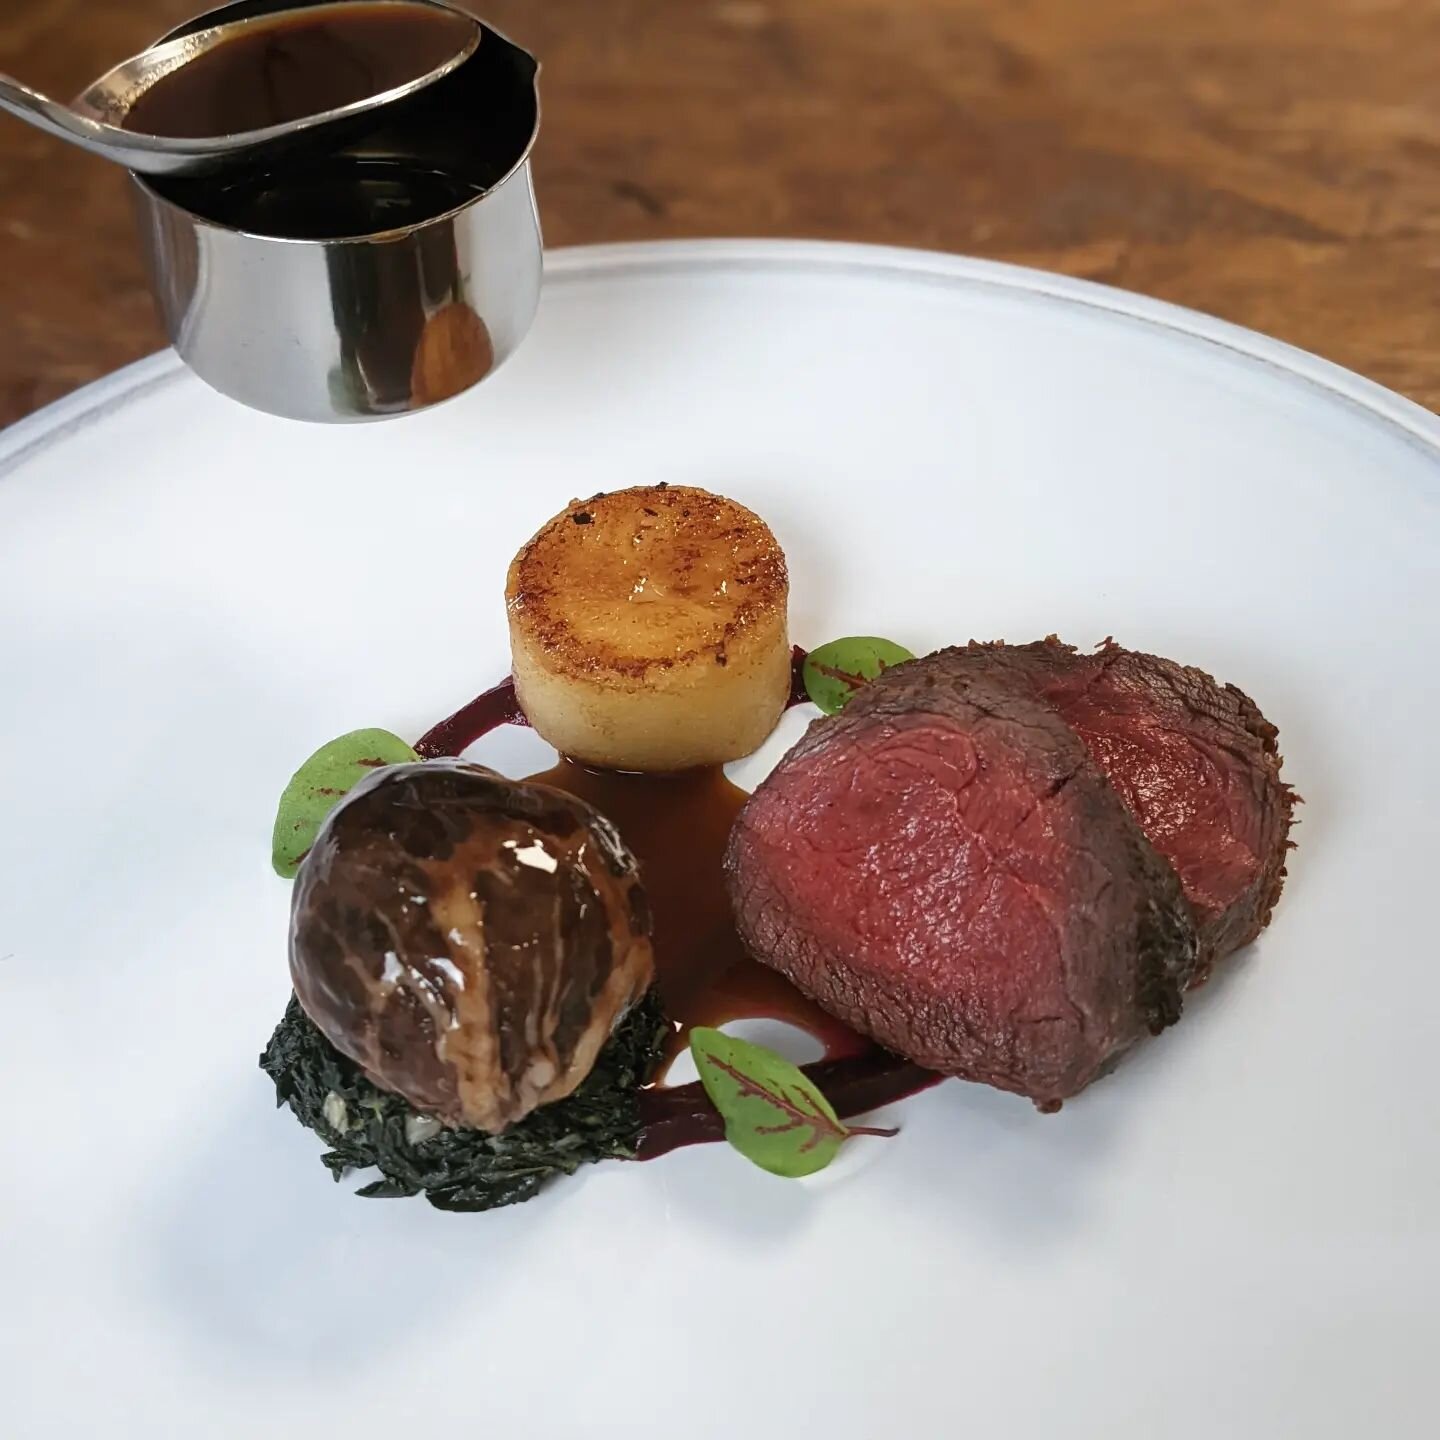 New dish tasting today with @rob_davis_chef

Beautiful local venison haunch from @robertandedwards with beetroot ketchup, braised cavolo nero, fondant potato and venison faggot